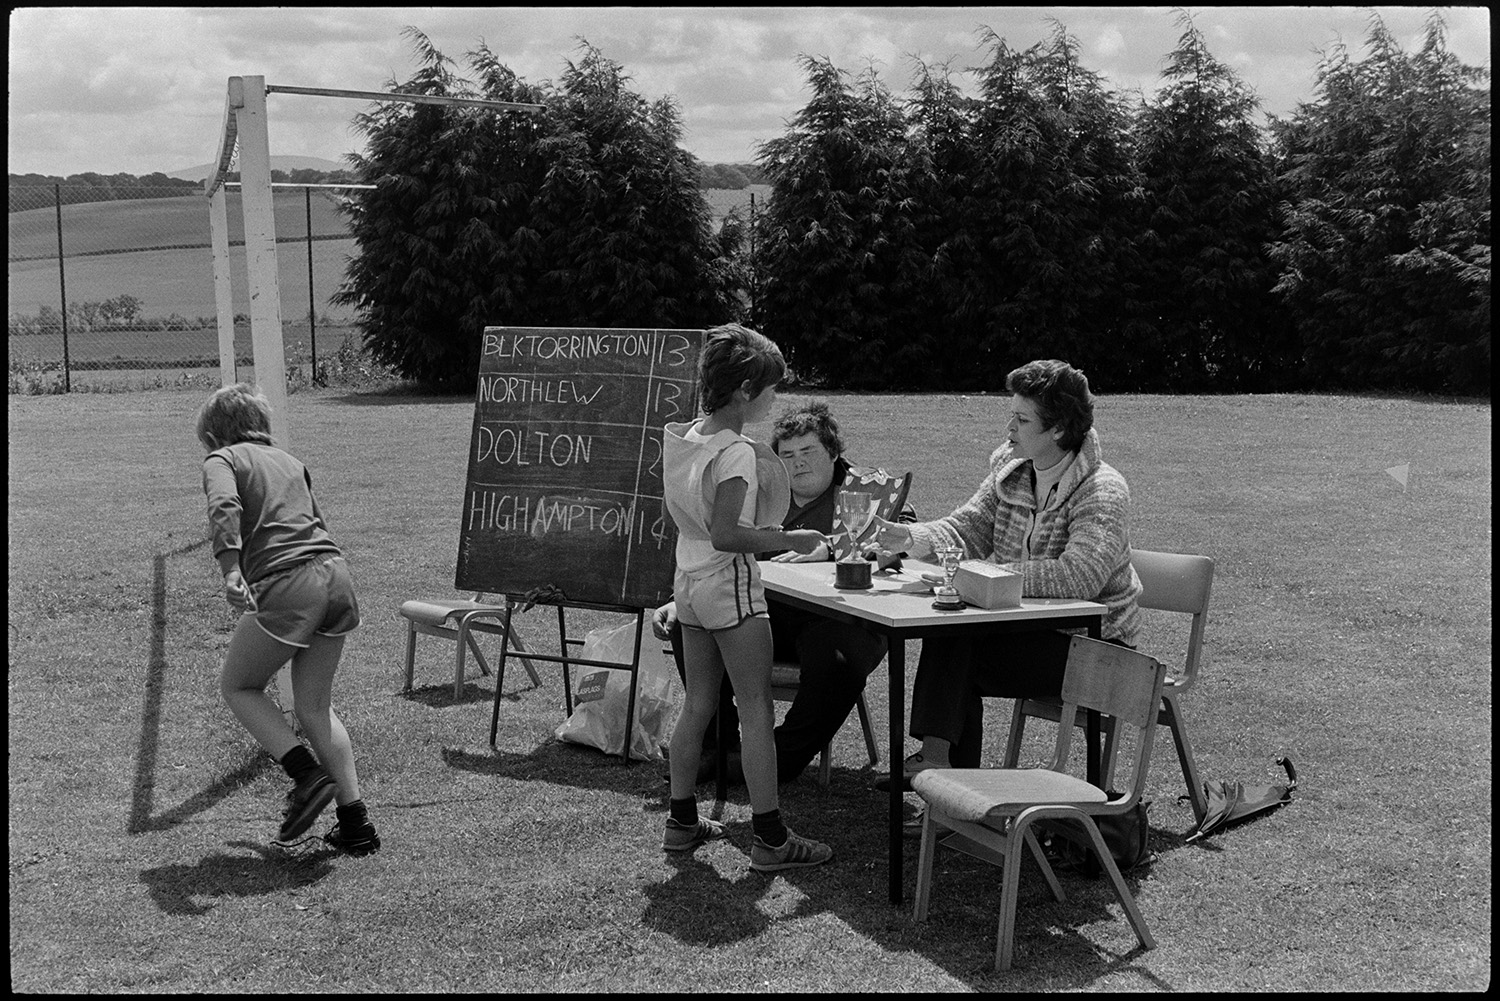 School sports day, children races, prize giving, cups. 
[Children talking to a teacher sat at a table with trophies on Winkleigh school sports field at a sports day where children from Black Torrington School, Northlew School, Dolton School and Highampton School were competing. The schools are listed on a chalkboard next to the table, with the number of points they have won.]